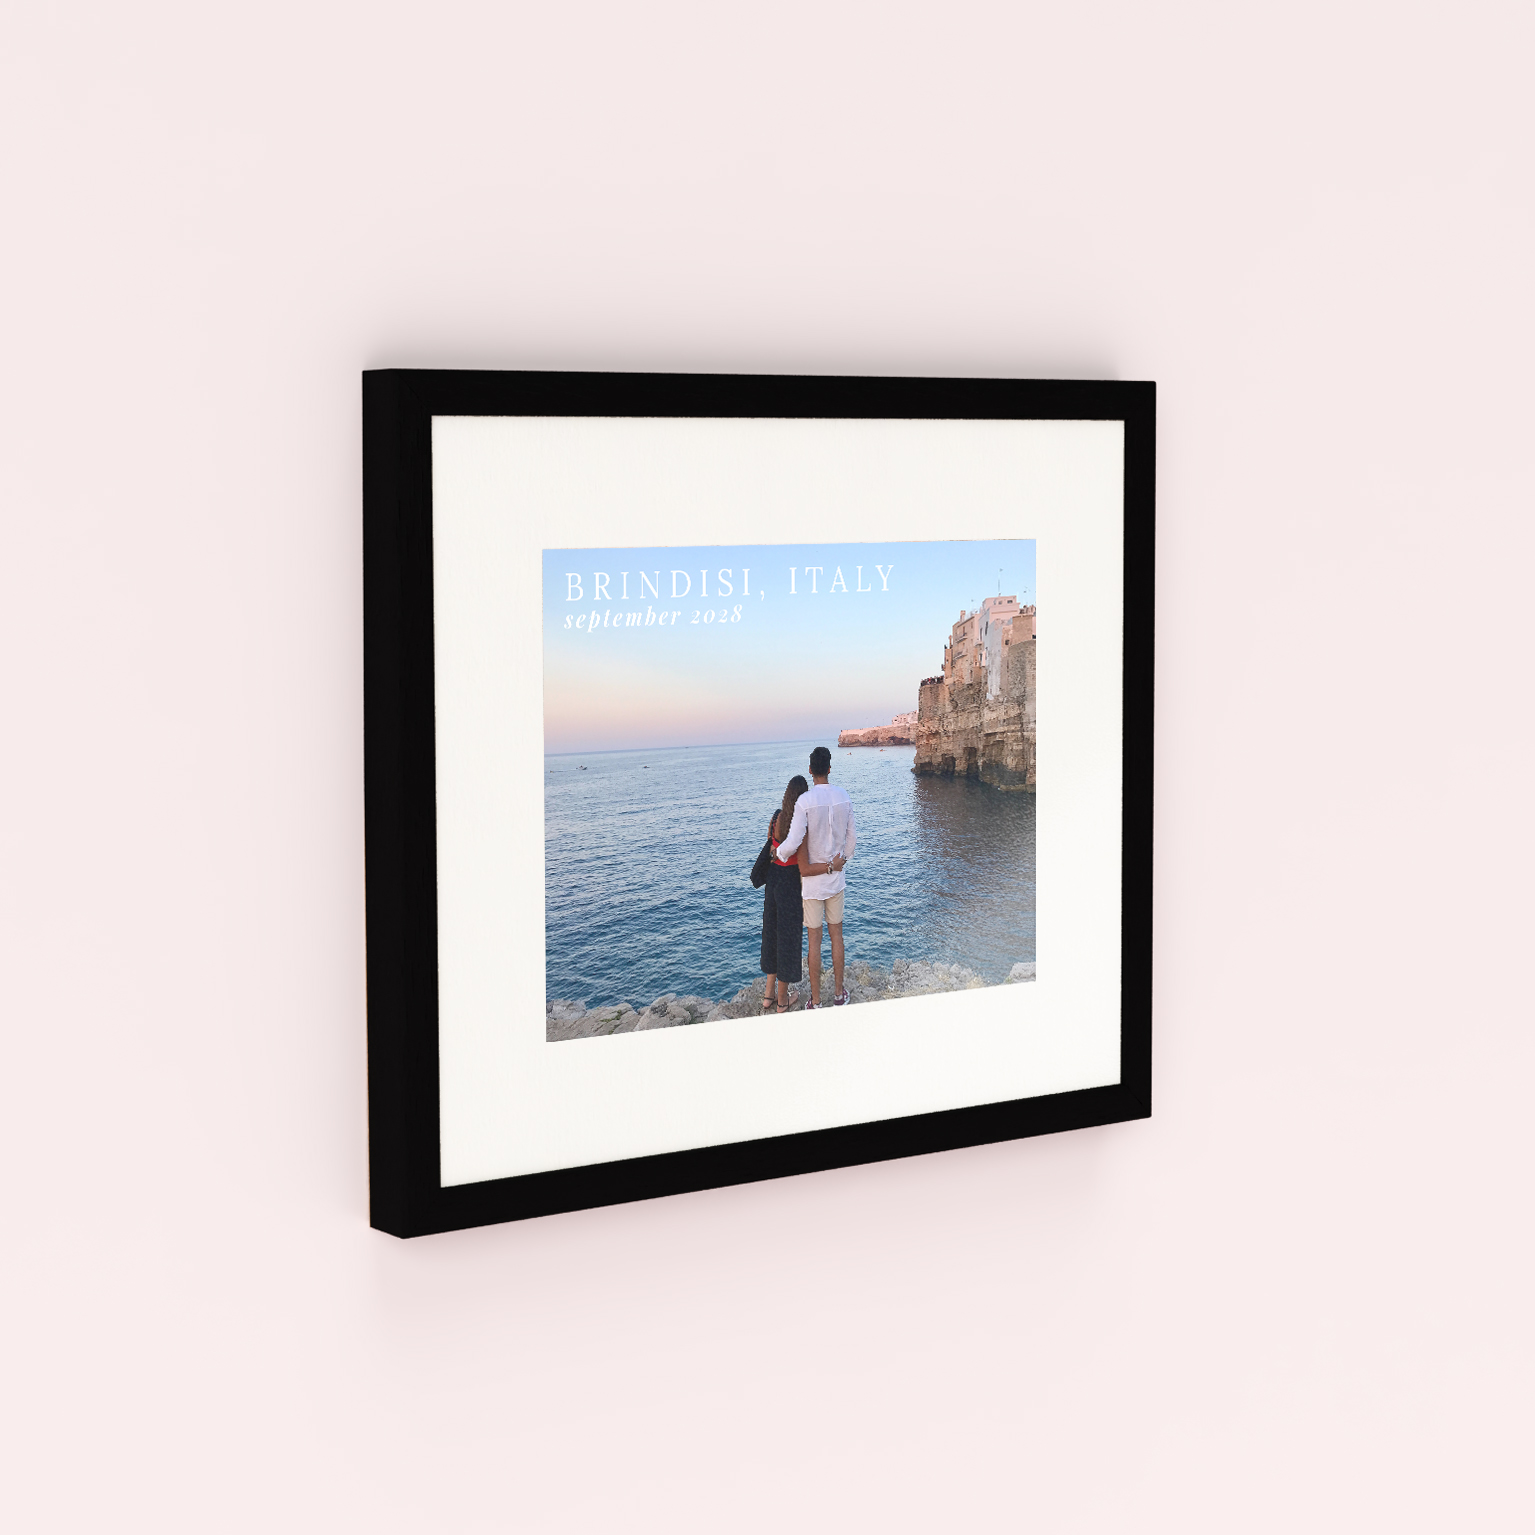 Shared Moments Framed Photo Print - Preserve nostalgia with personalized memories close at hand.